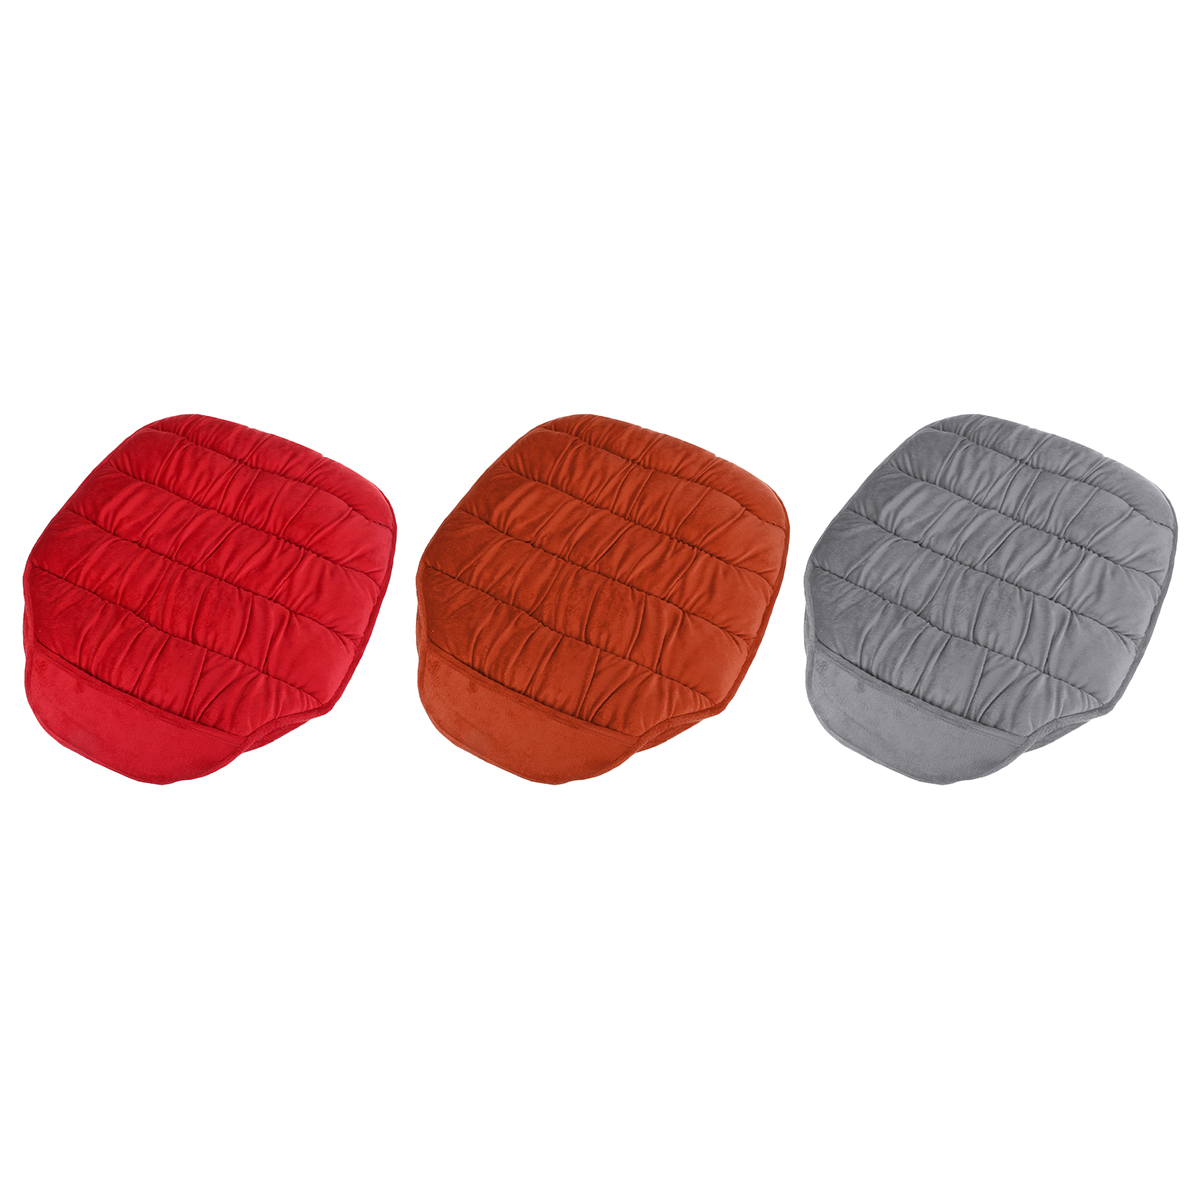 Universal-Car-Front-Seat-Cover-Soft-Plush-Breathable-Pads-Winter-Chair-Cushion-1628307-7